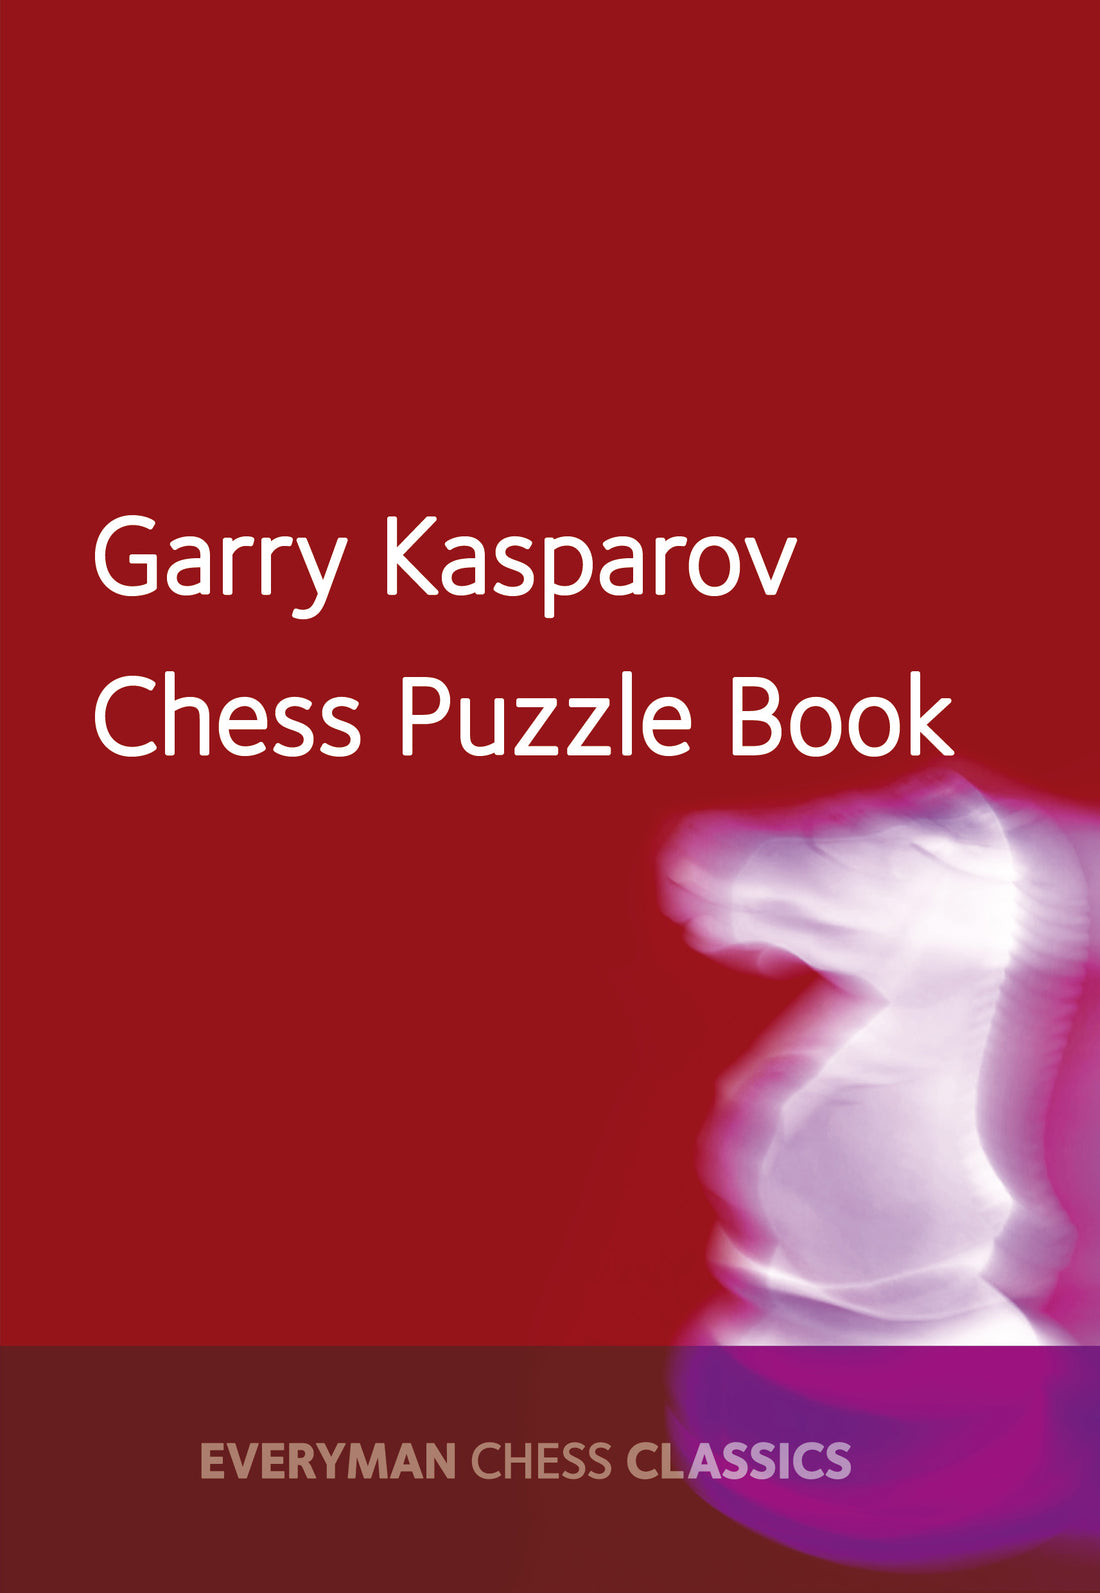 Garry Kasparov's Chess Puzzle Book front cover